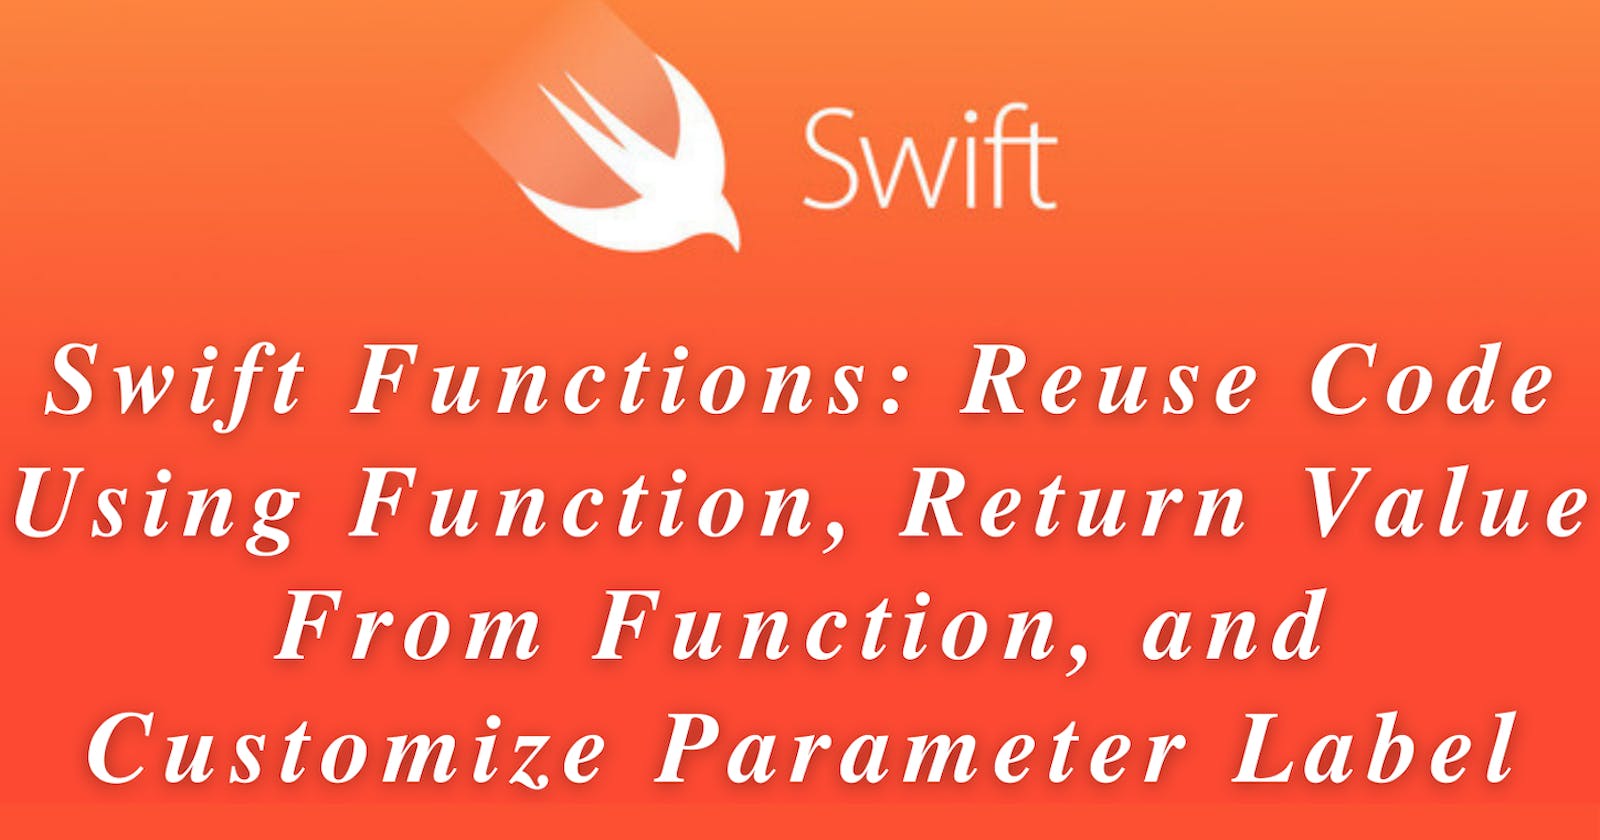 Swift Functions: Reuse Code Using Function, Return Value From Function, and Customize Parameter Label